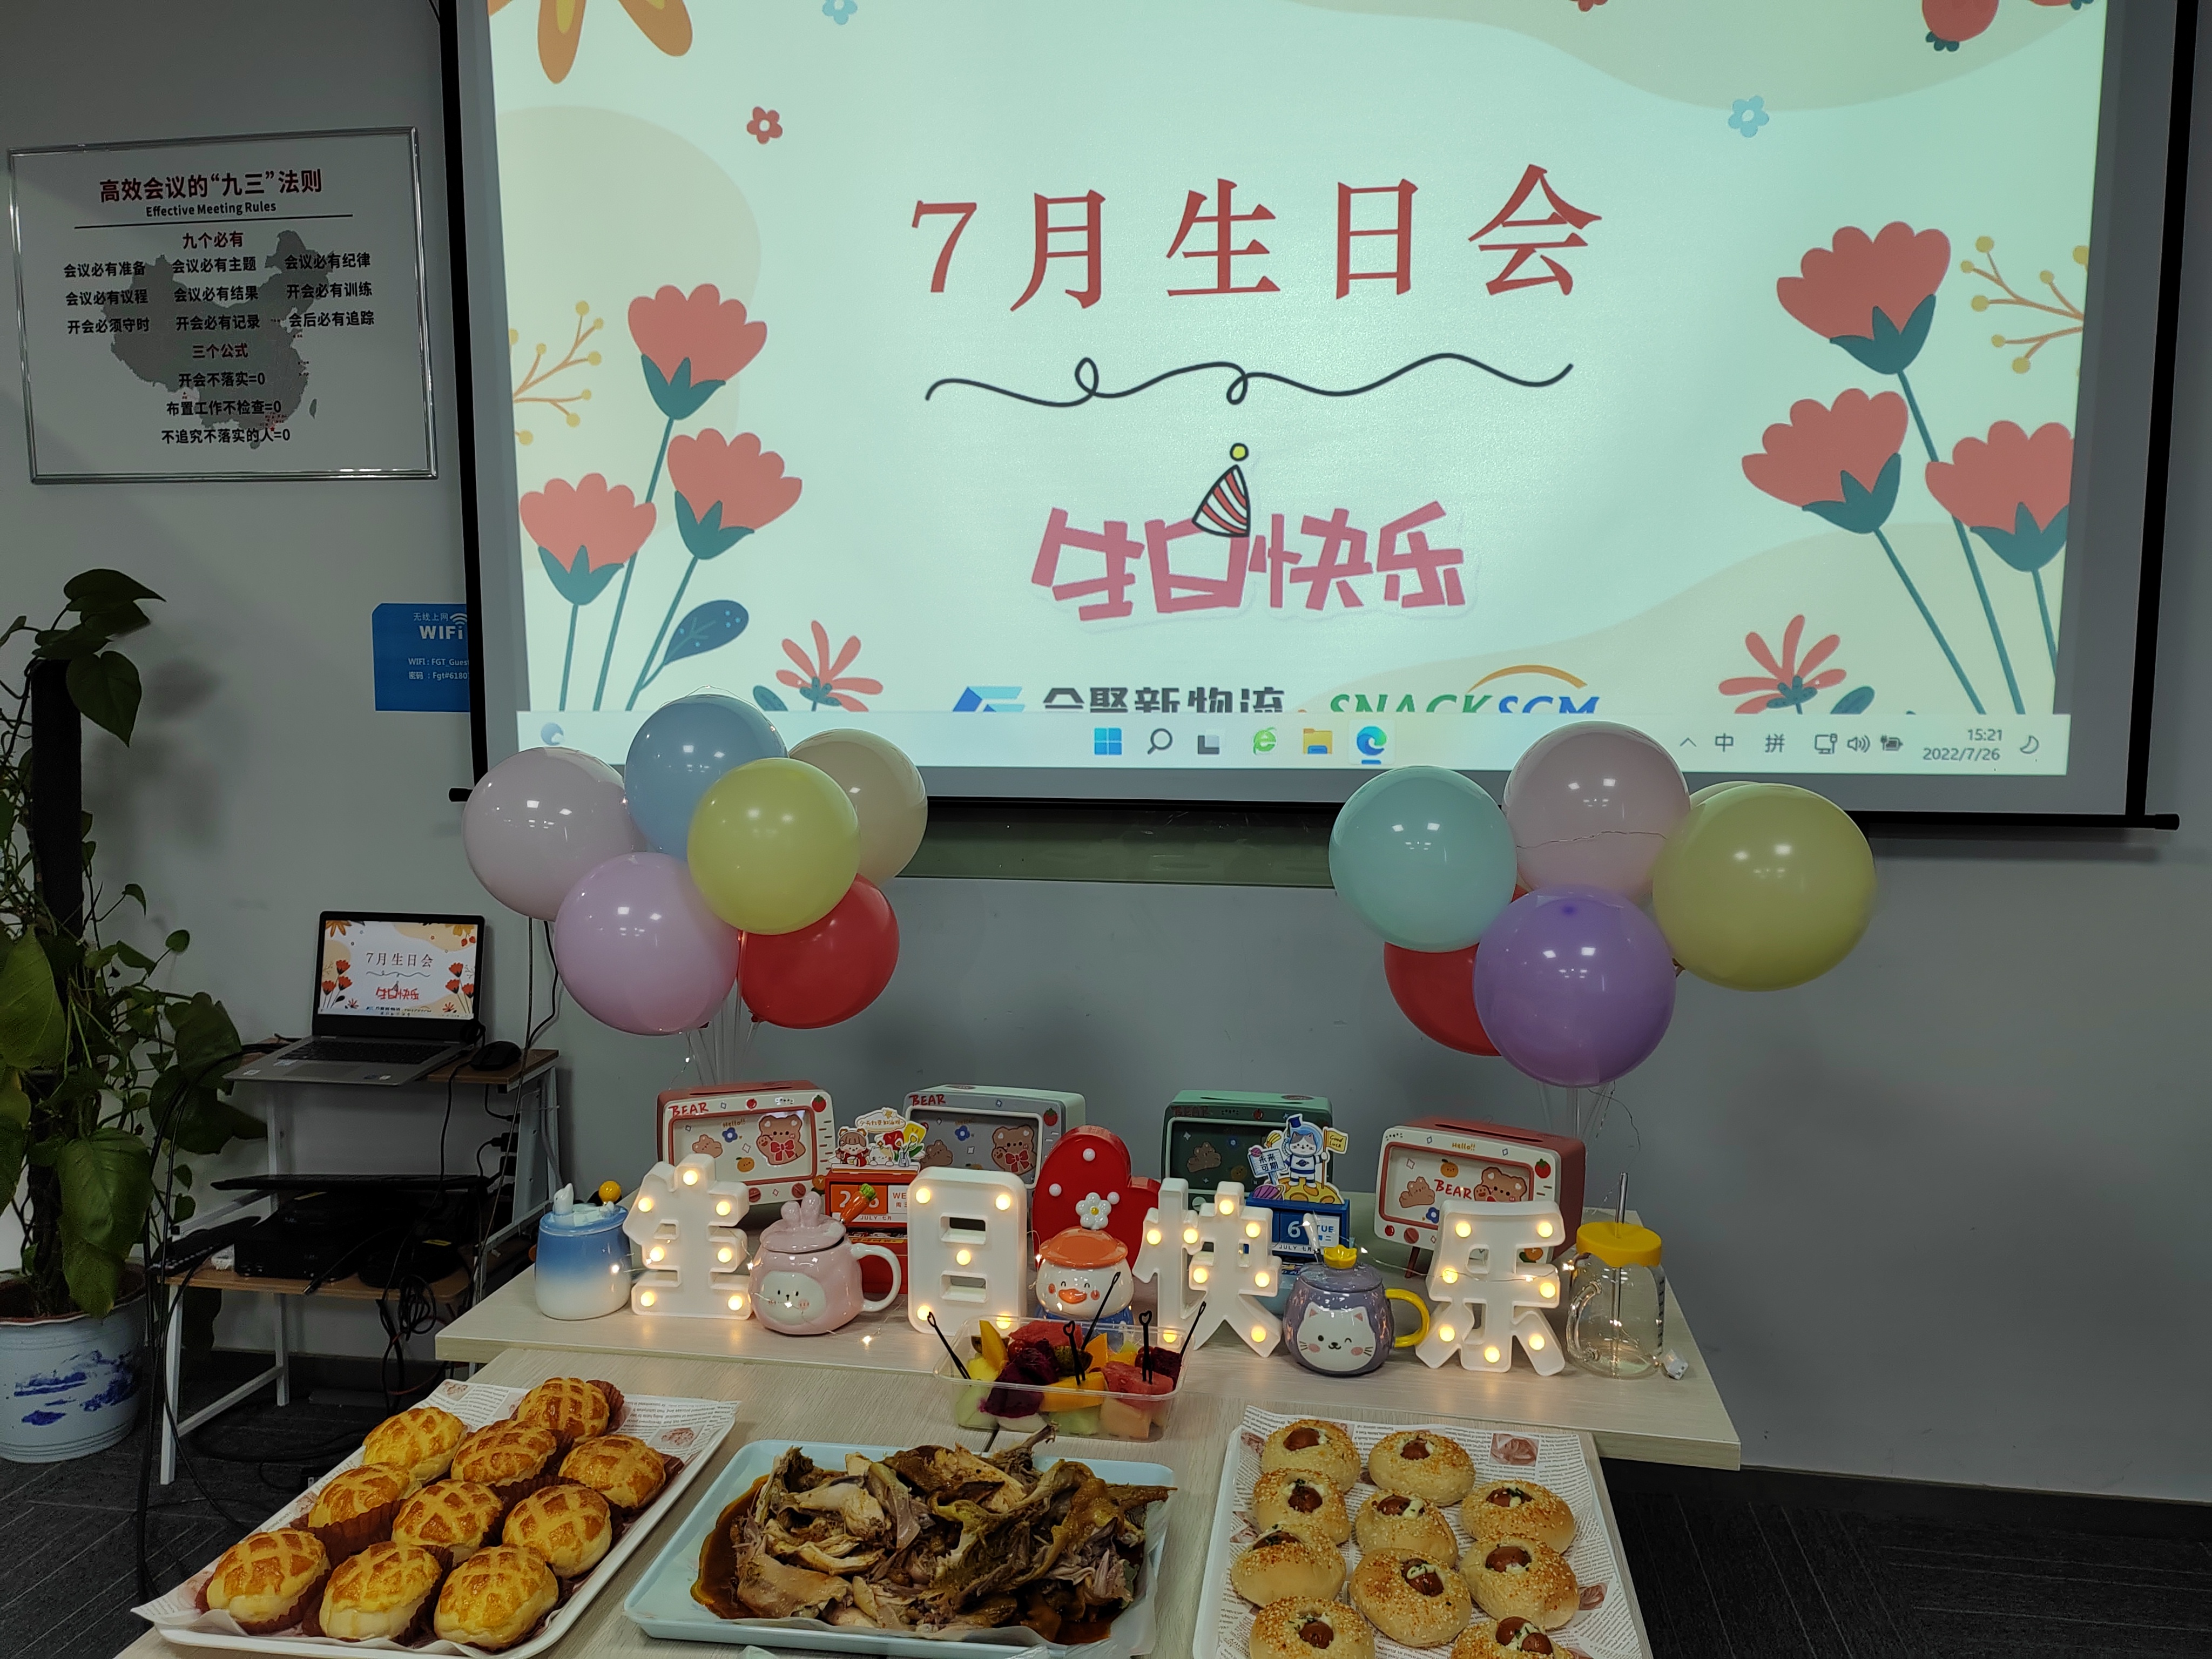 Birthday Party | FOCUS GLOBAL LOGISTICS CO., LTD. is holding a birthday party in July, happy!